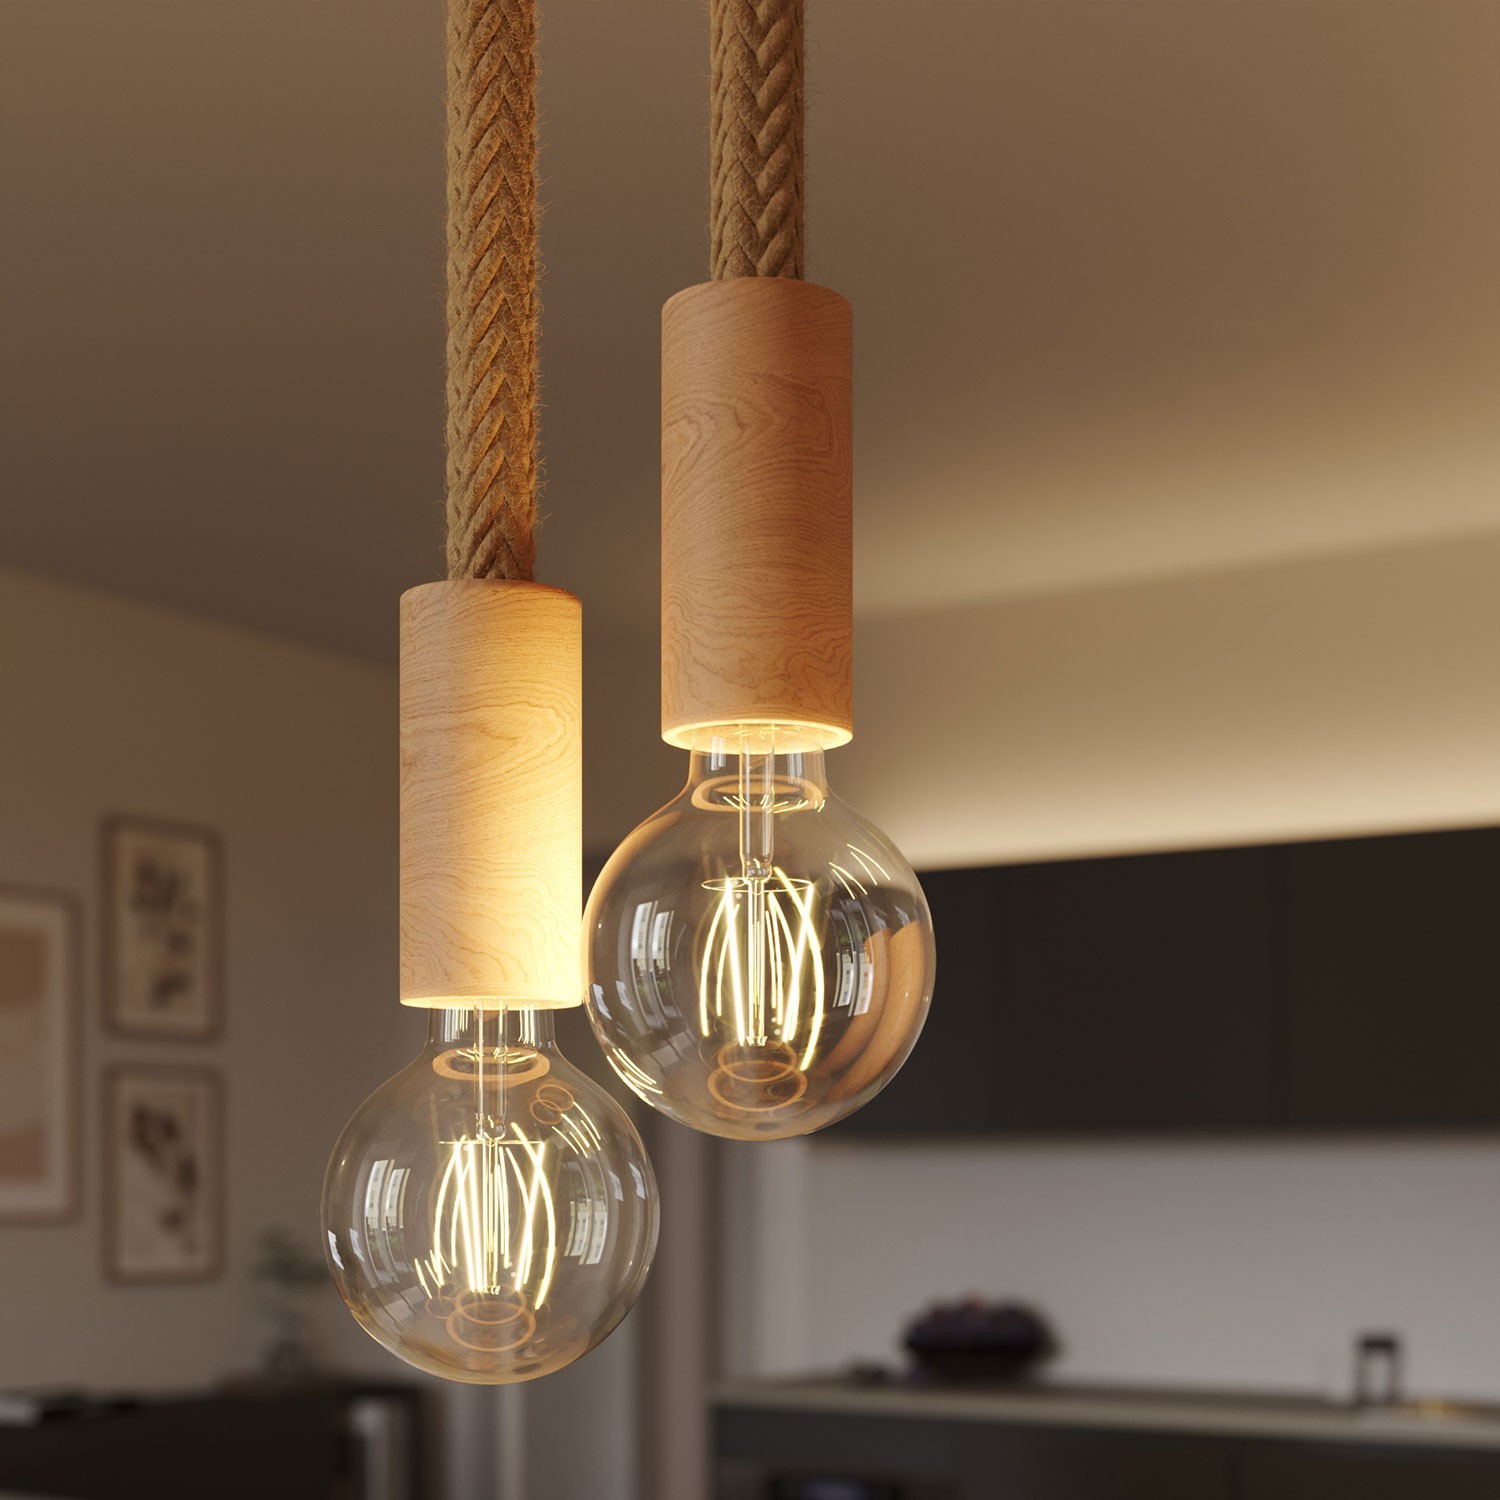 Multiple 2-fall pendant light complete with 2XL rope cable and wood finishing